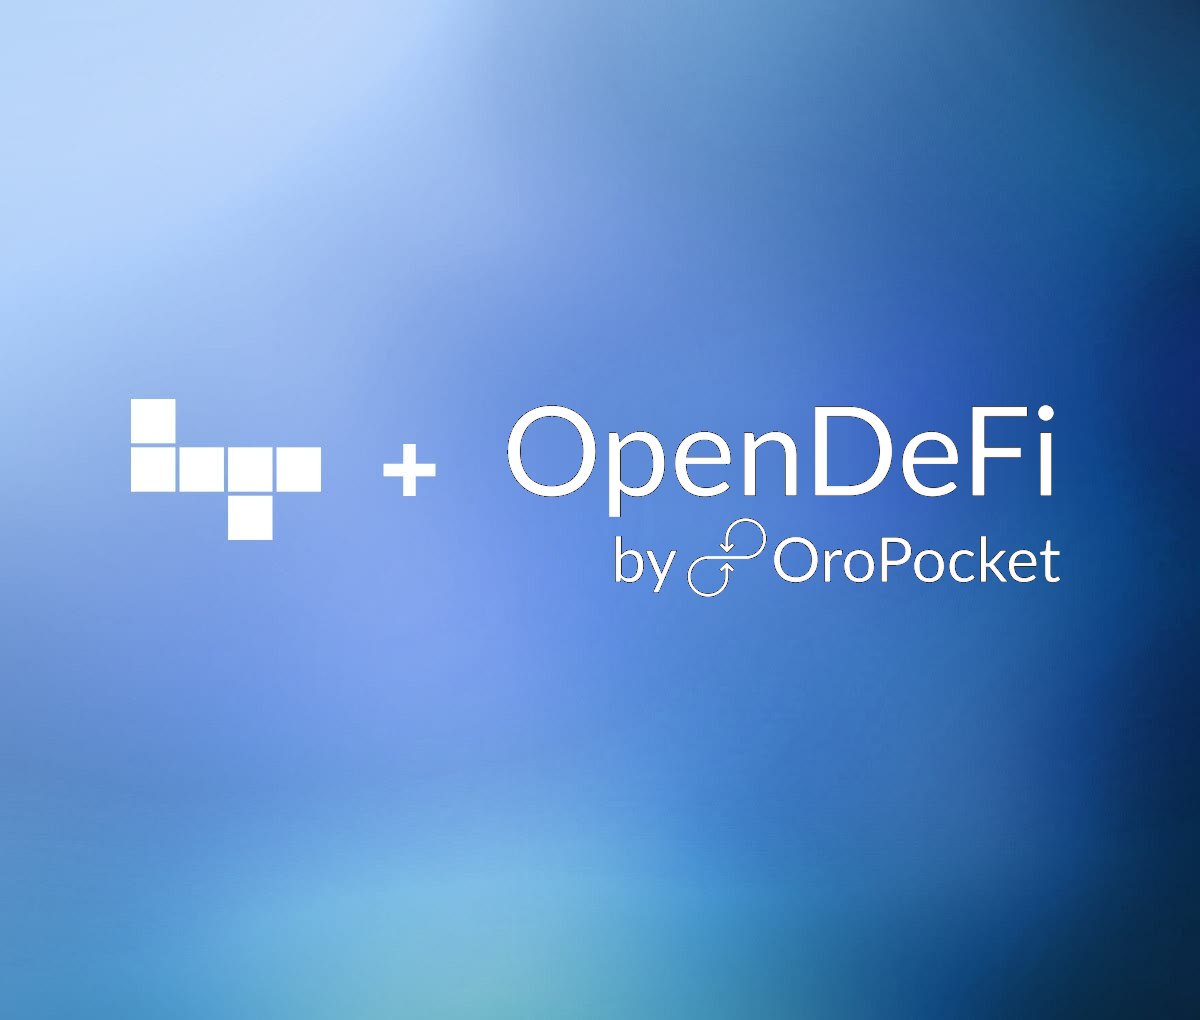 Blockpass Partners with OpenDeFi for KYC Provision and PASS Rewards